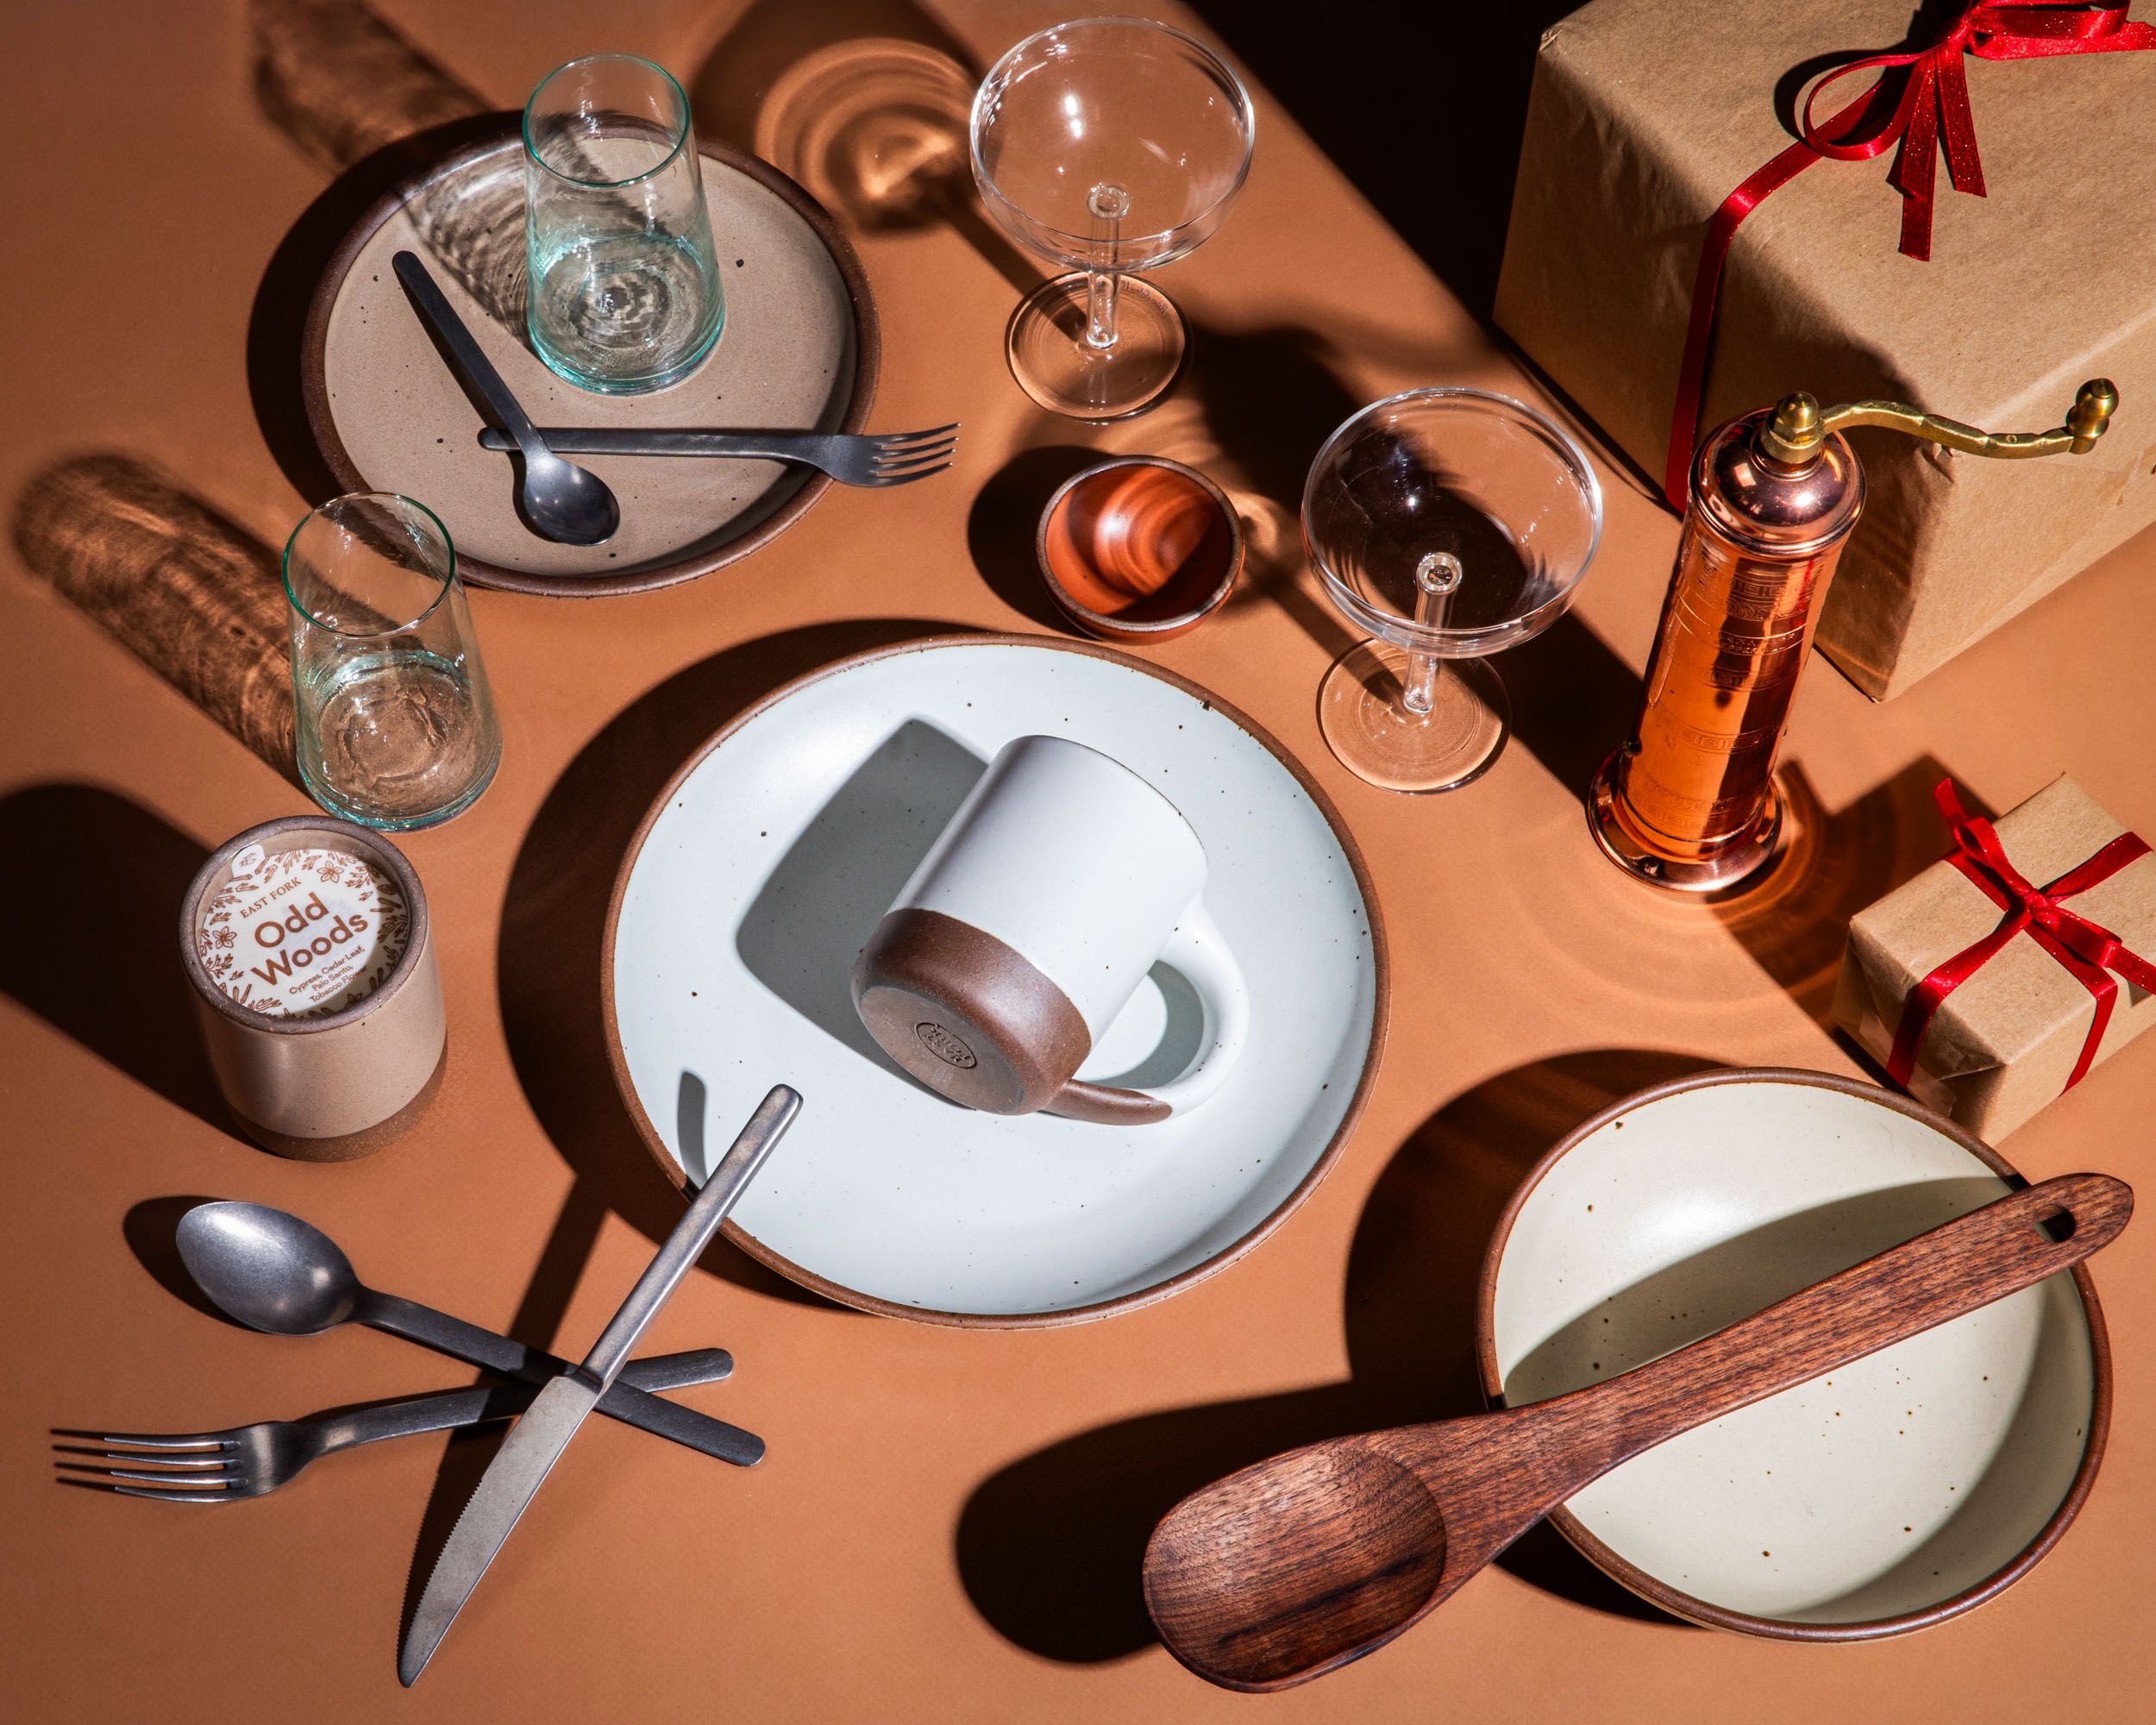 A flatlay of different dinnerware items including ceramic plates, wooden spoon, flatware, martini coupes, and a copper pepper grinder. In the corner is a kraft paper wrapped present with a red ribbon on it.